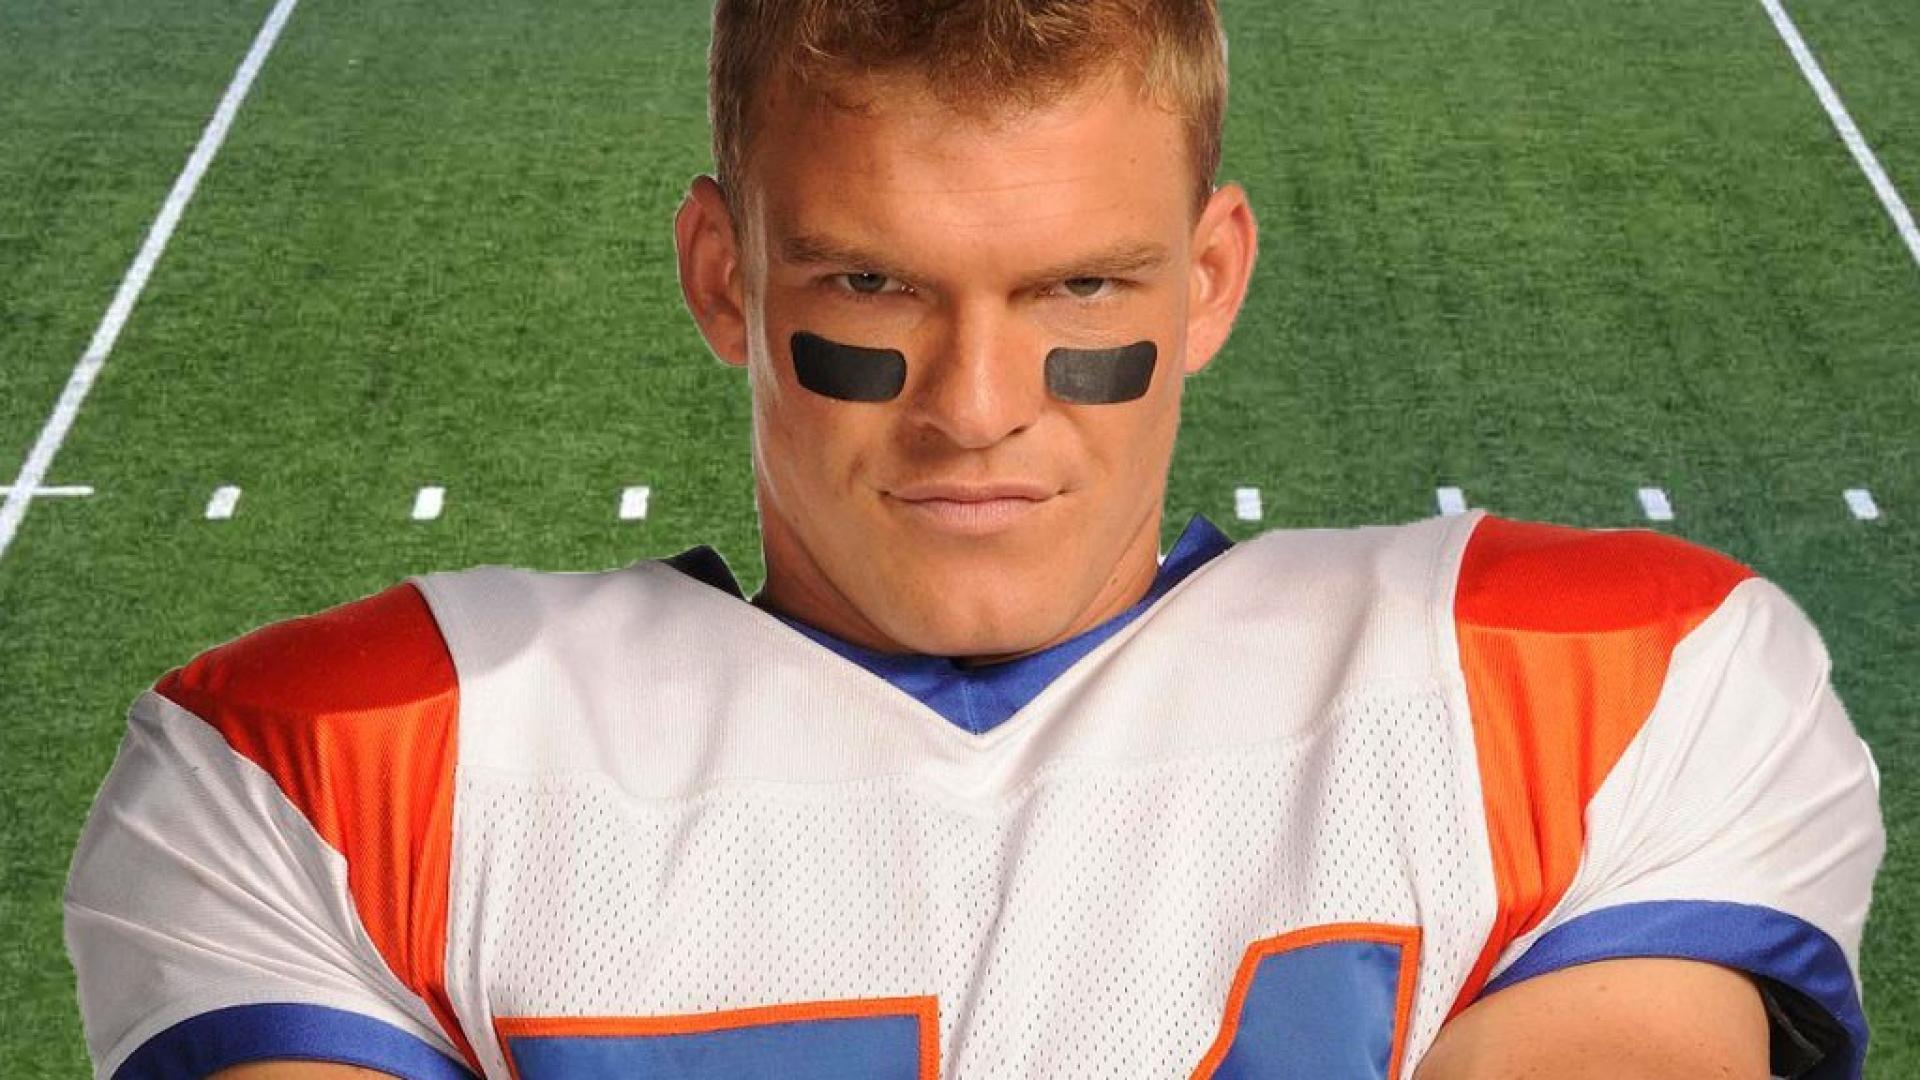 Blue mountain state thad castle alan ritchson wallpaper